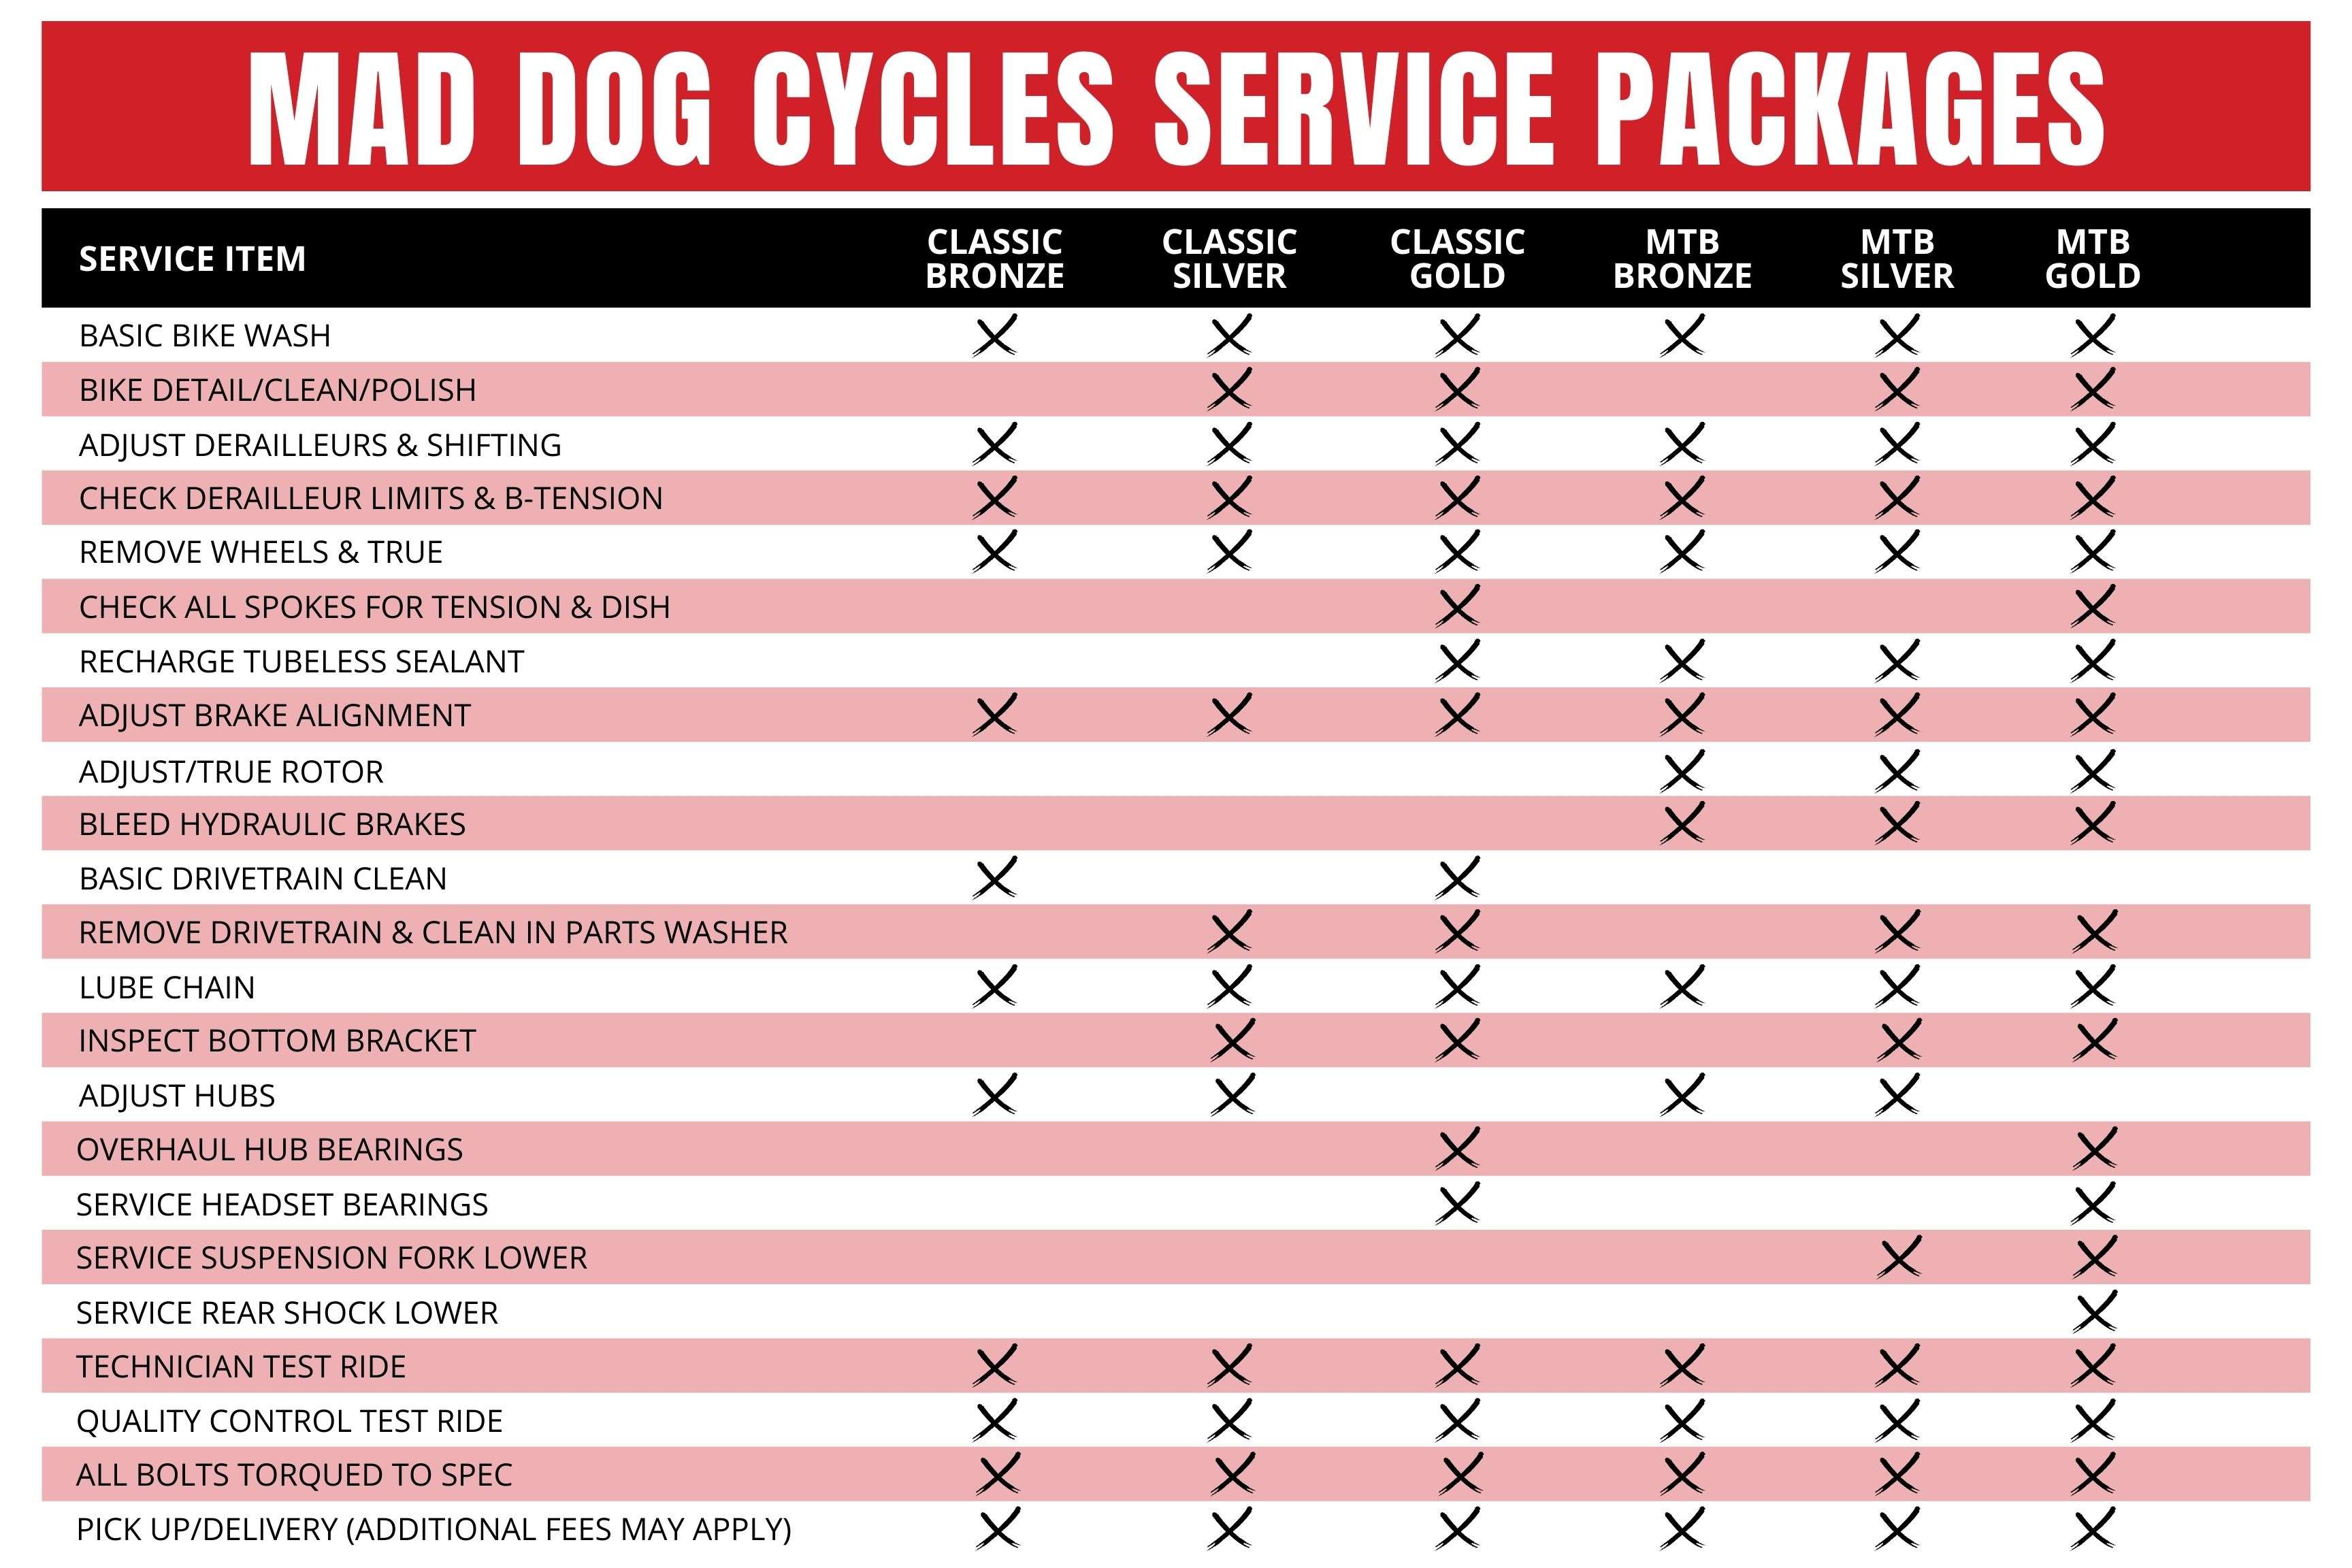 Mad Dog Cycles Service Packages